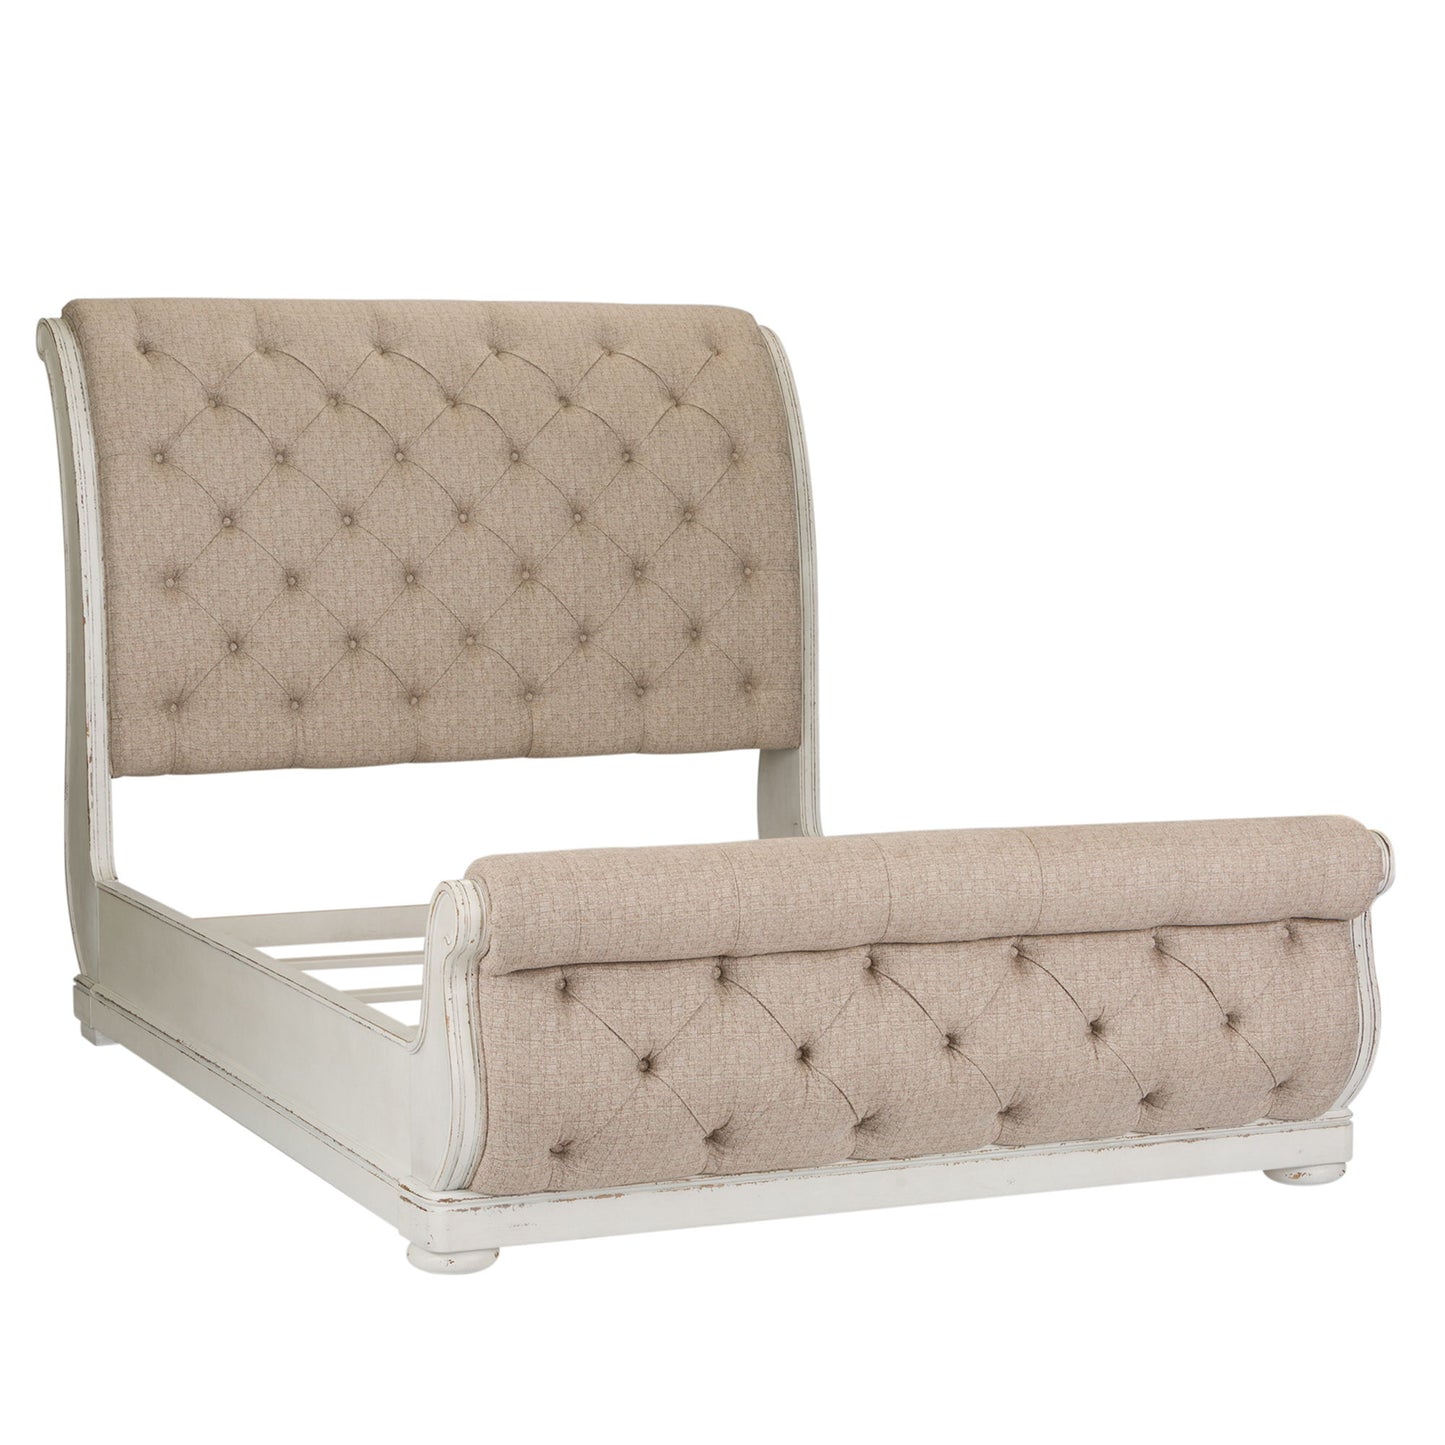 Abbey Park - Queen Upholstered Sleigh Bed - White